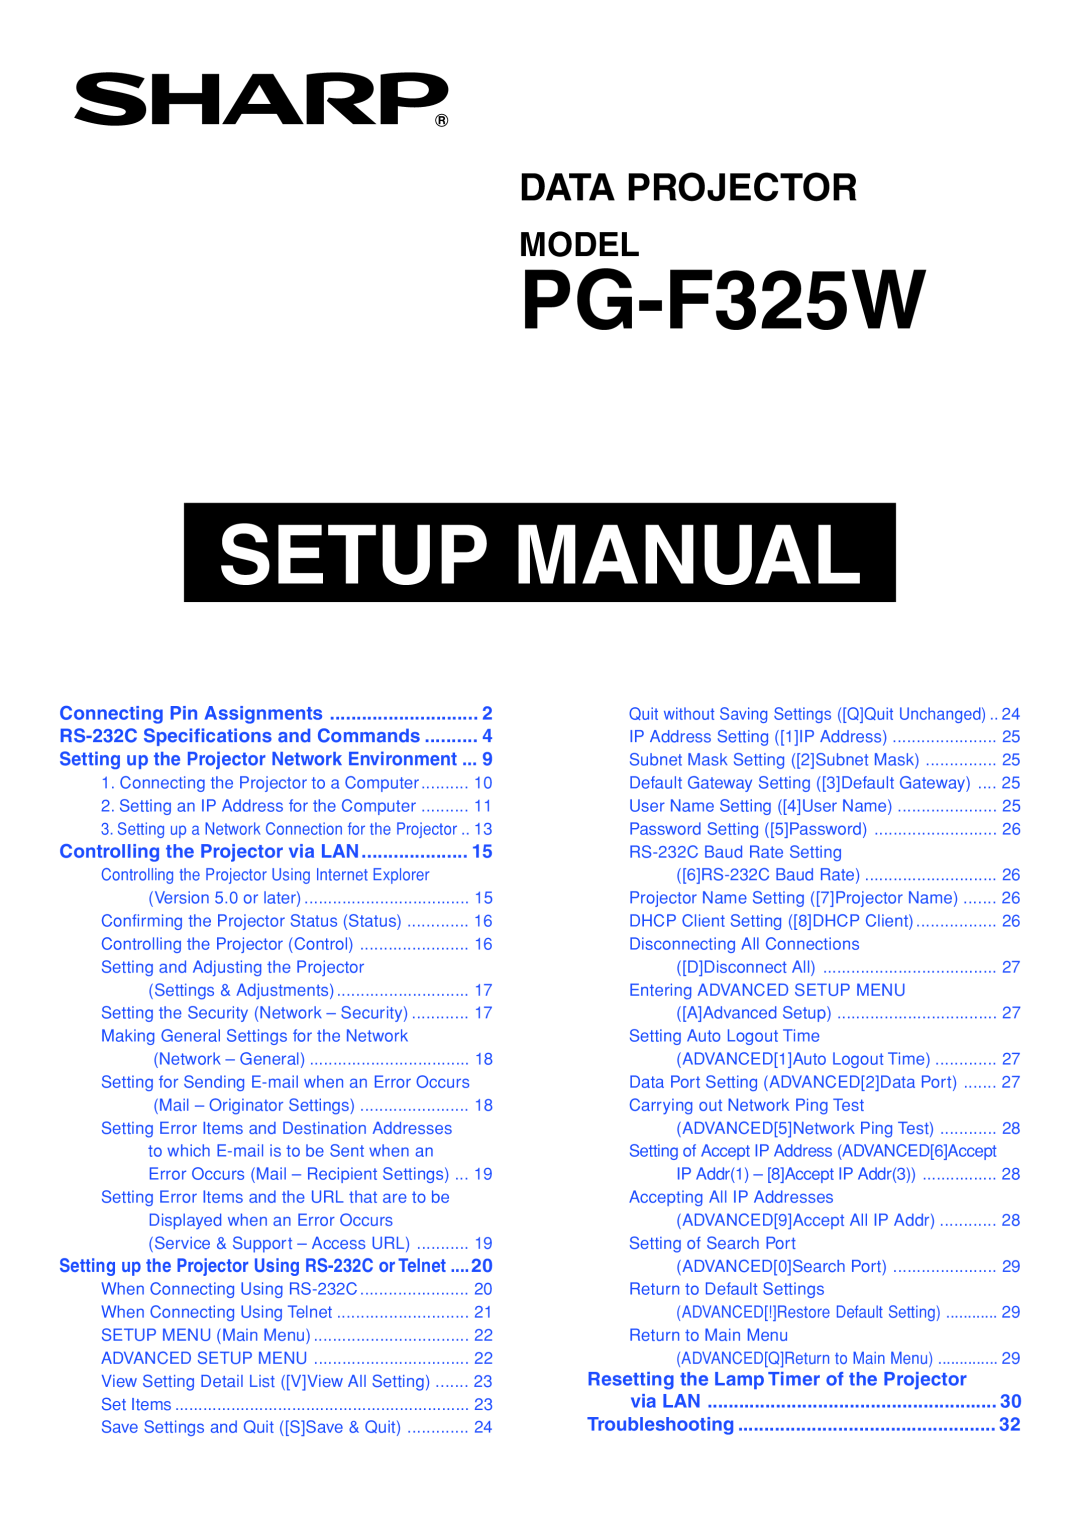 Sharp PG-F325W specifications Setup Manual, Data Projector, Model, Connecting Pin Assignments, via LAN, Troubleshooting 